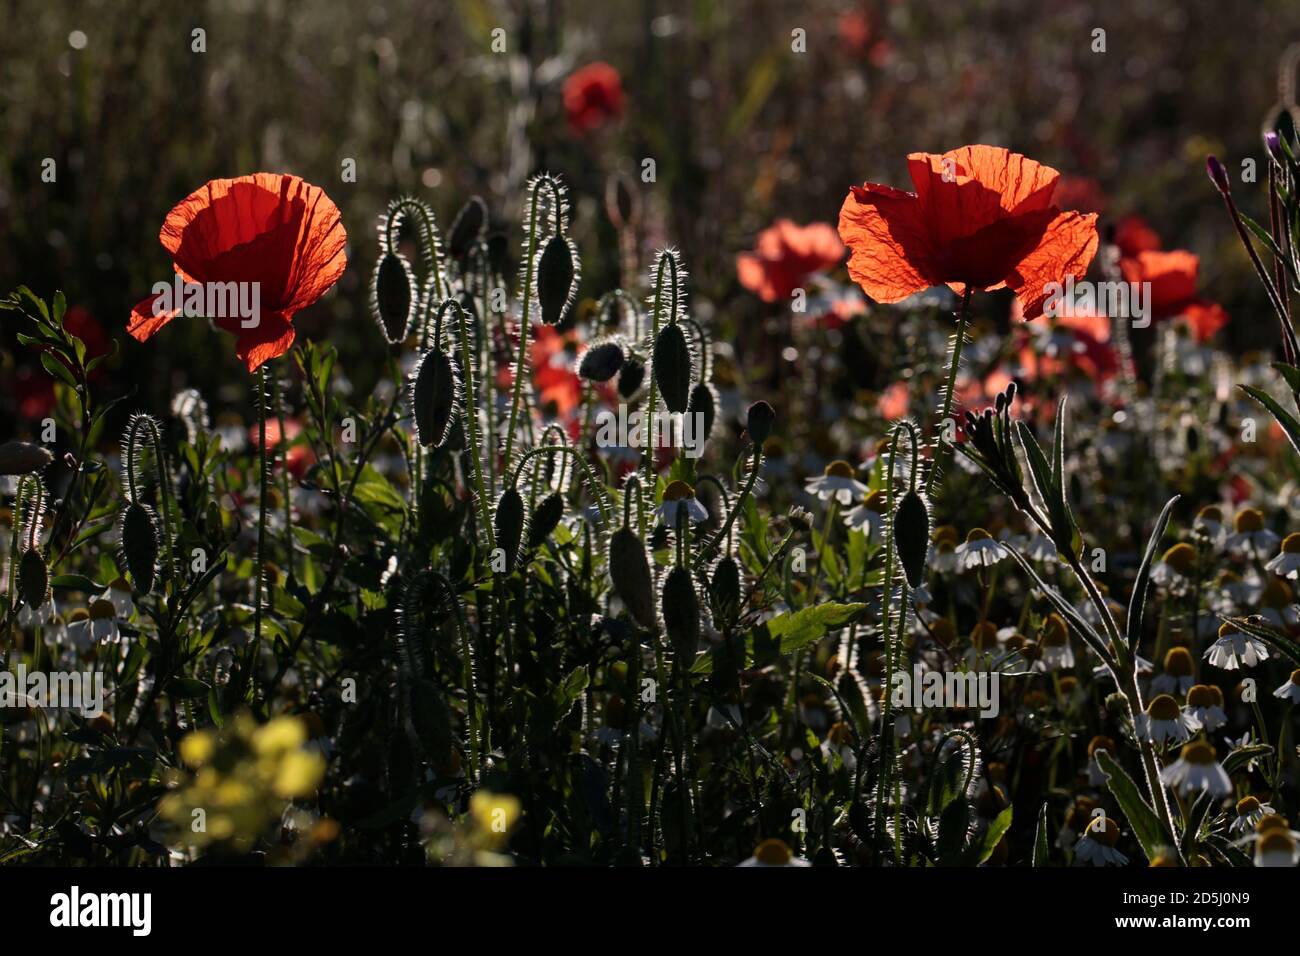 Red Poppies  (Papaver rhoeas) in a wildflower meadow Stock Photo